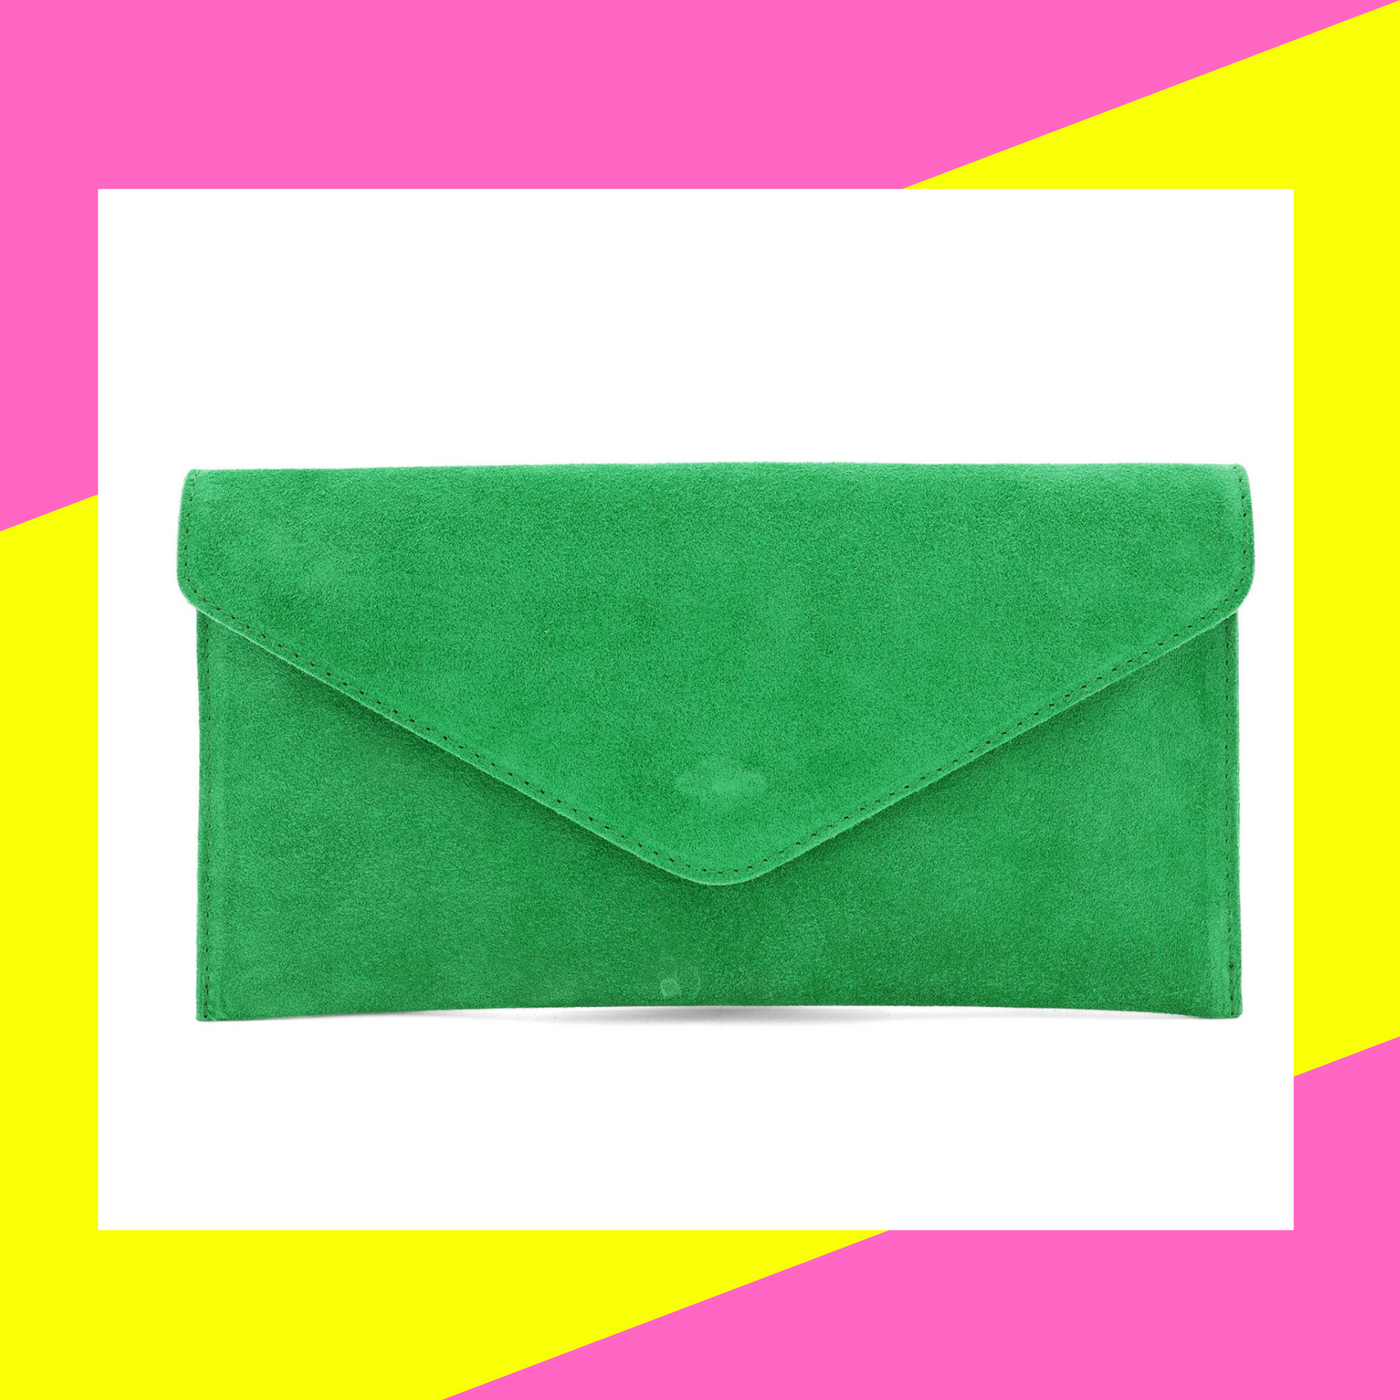 Vivid Green Suede Leather Clutch Bag